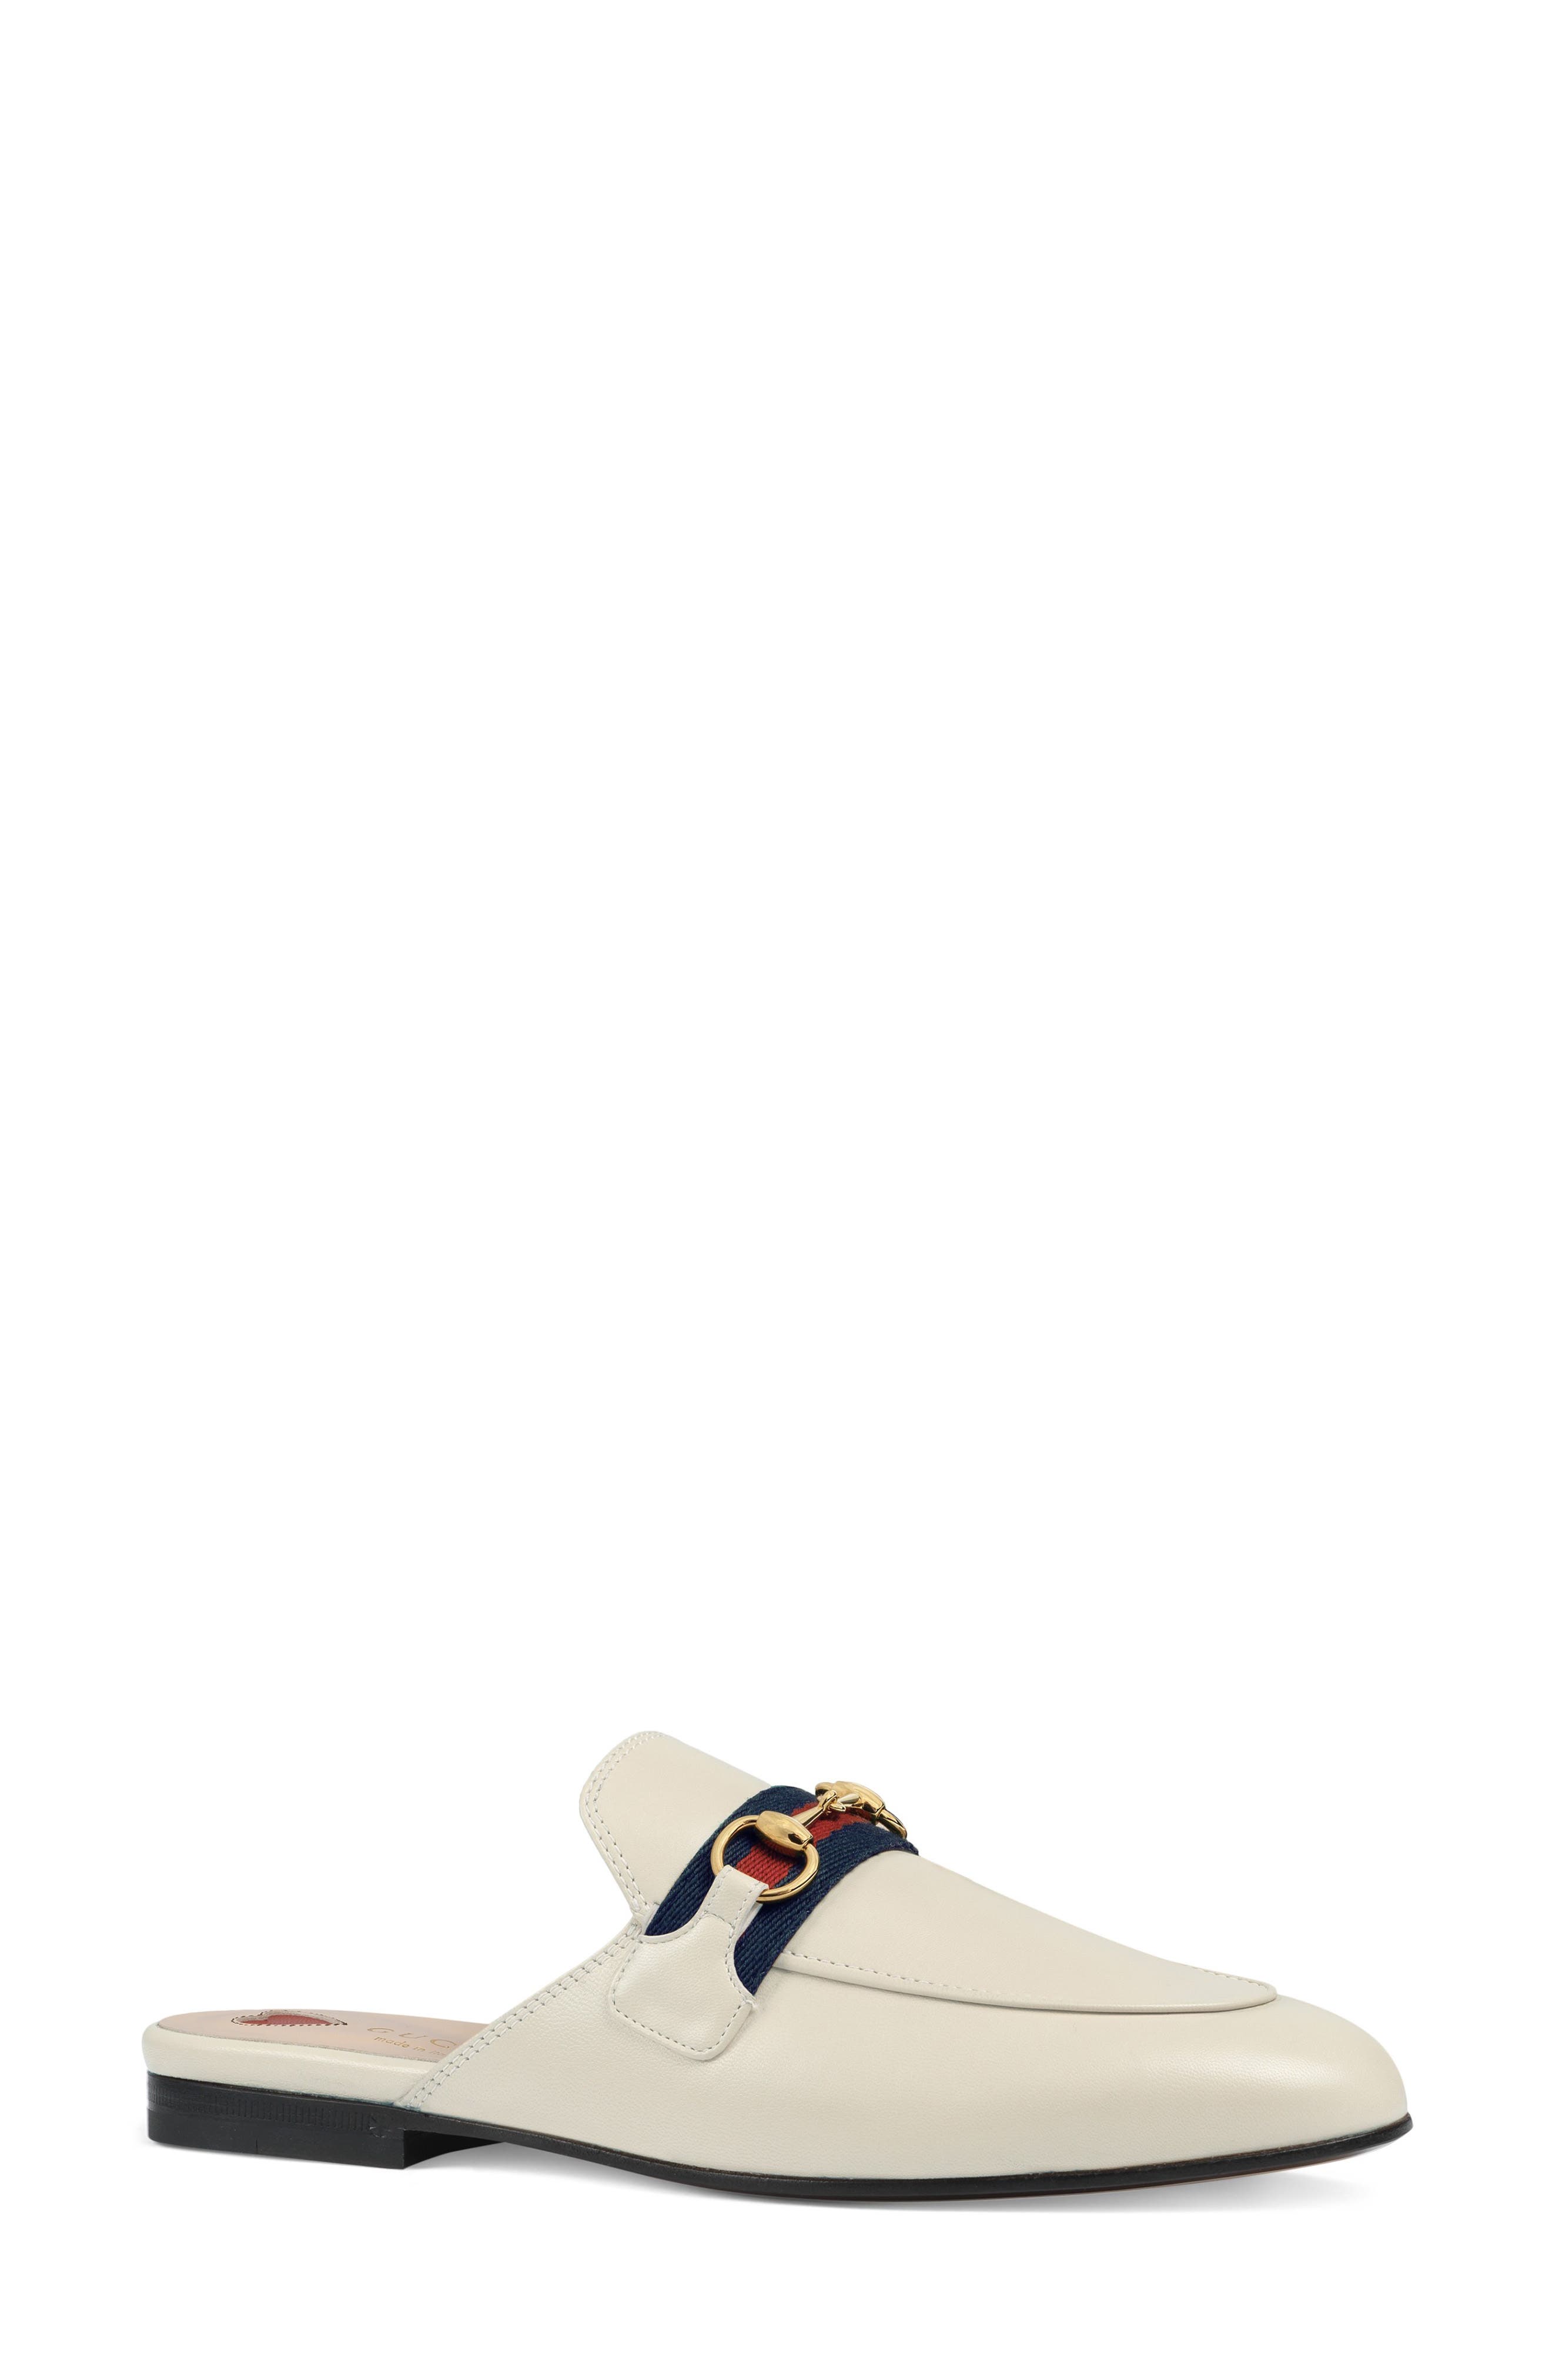 gucci white princetown leather mules